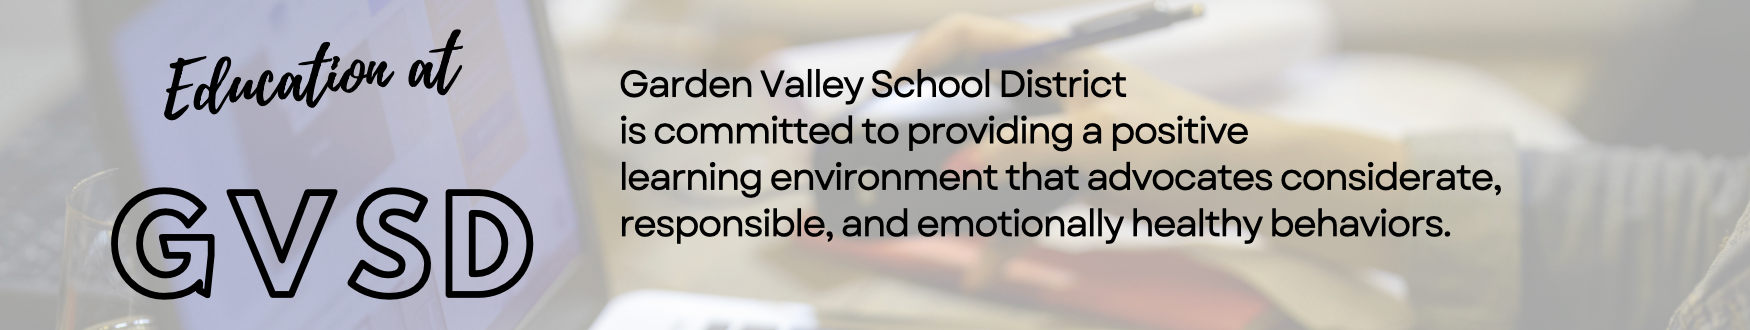 Garden Valley School District is committed to providing a positive learning environment that advocates considerate, responsible, and emotionally healthy behaviors.